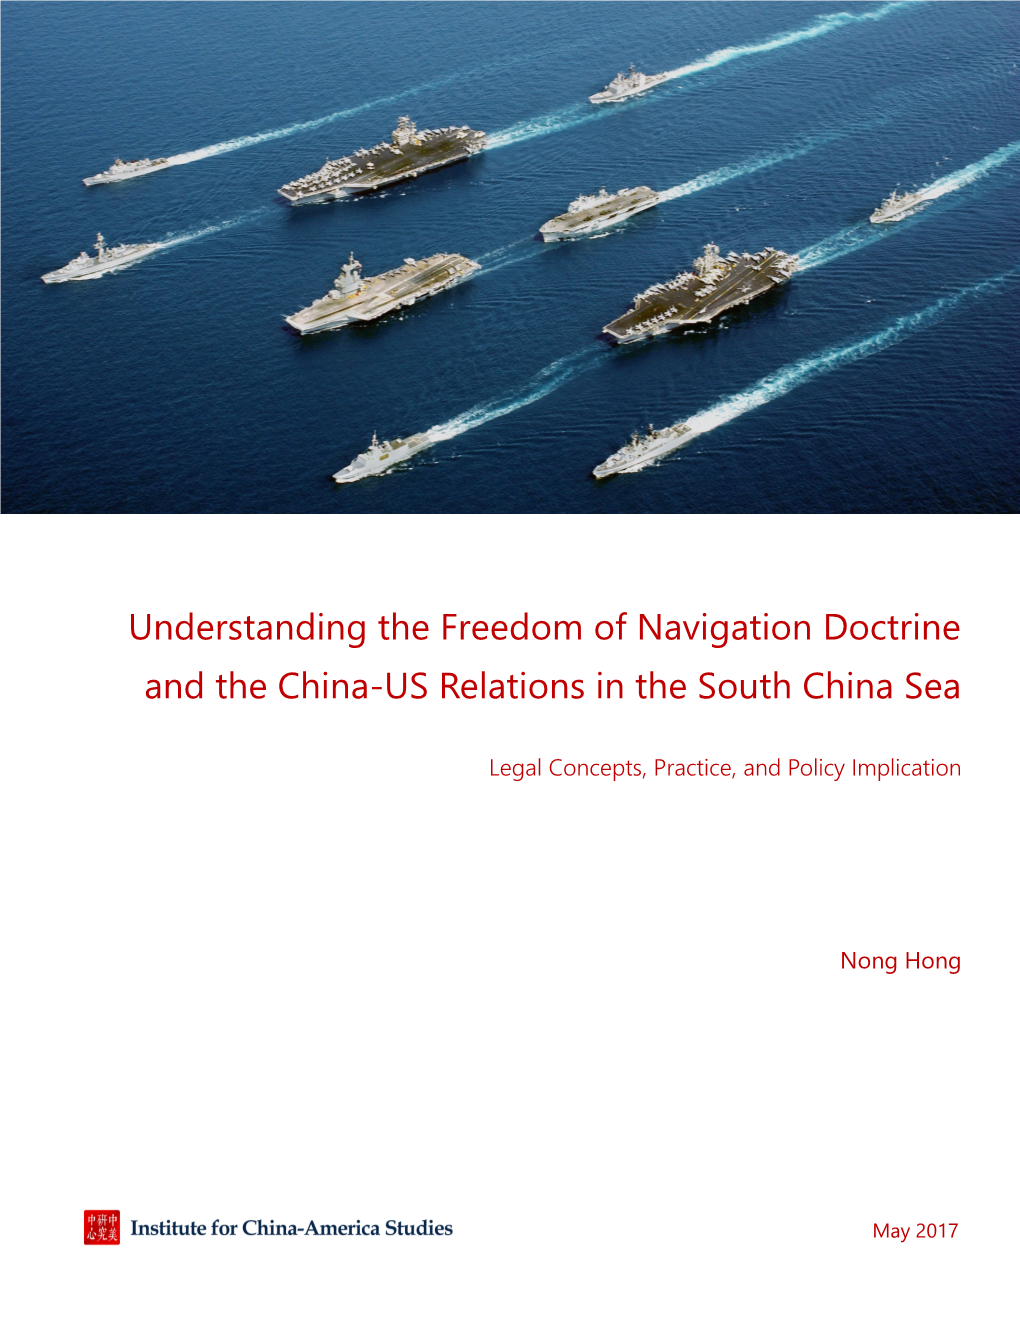 Understanding the Freedom of Navigation Doctrine and the China-US Relations in the South China Sea